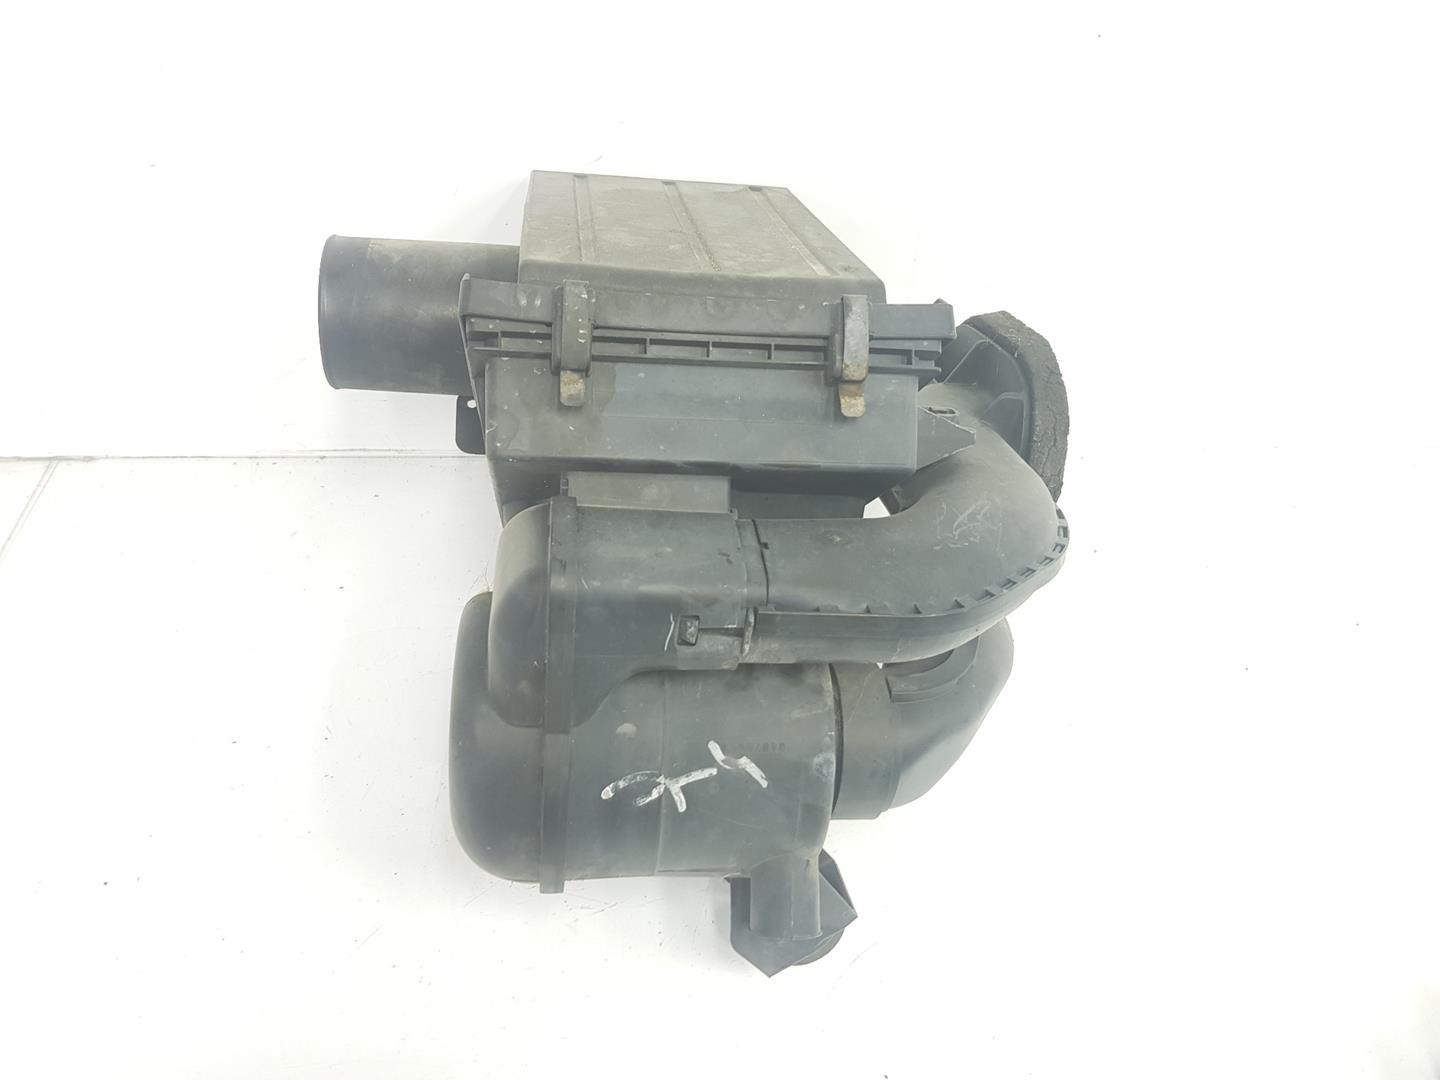 NISSAN NP300 1 generation (2008-2015) Other Engine Compartment Parts 16500EB300, 16500EB30C 19629891